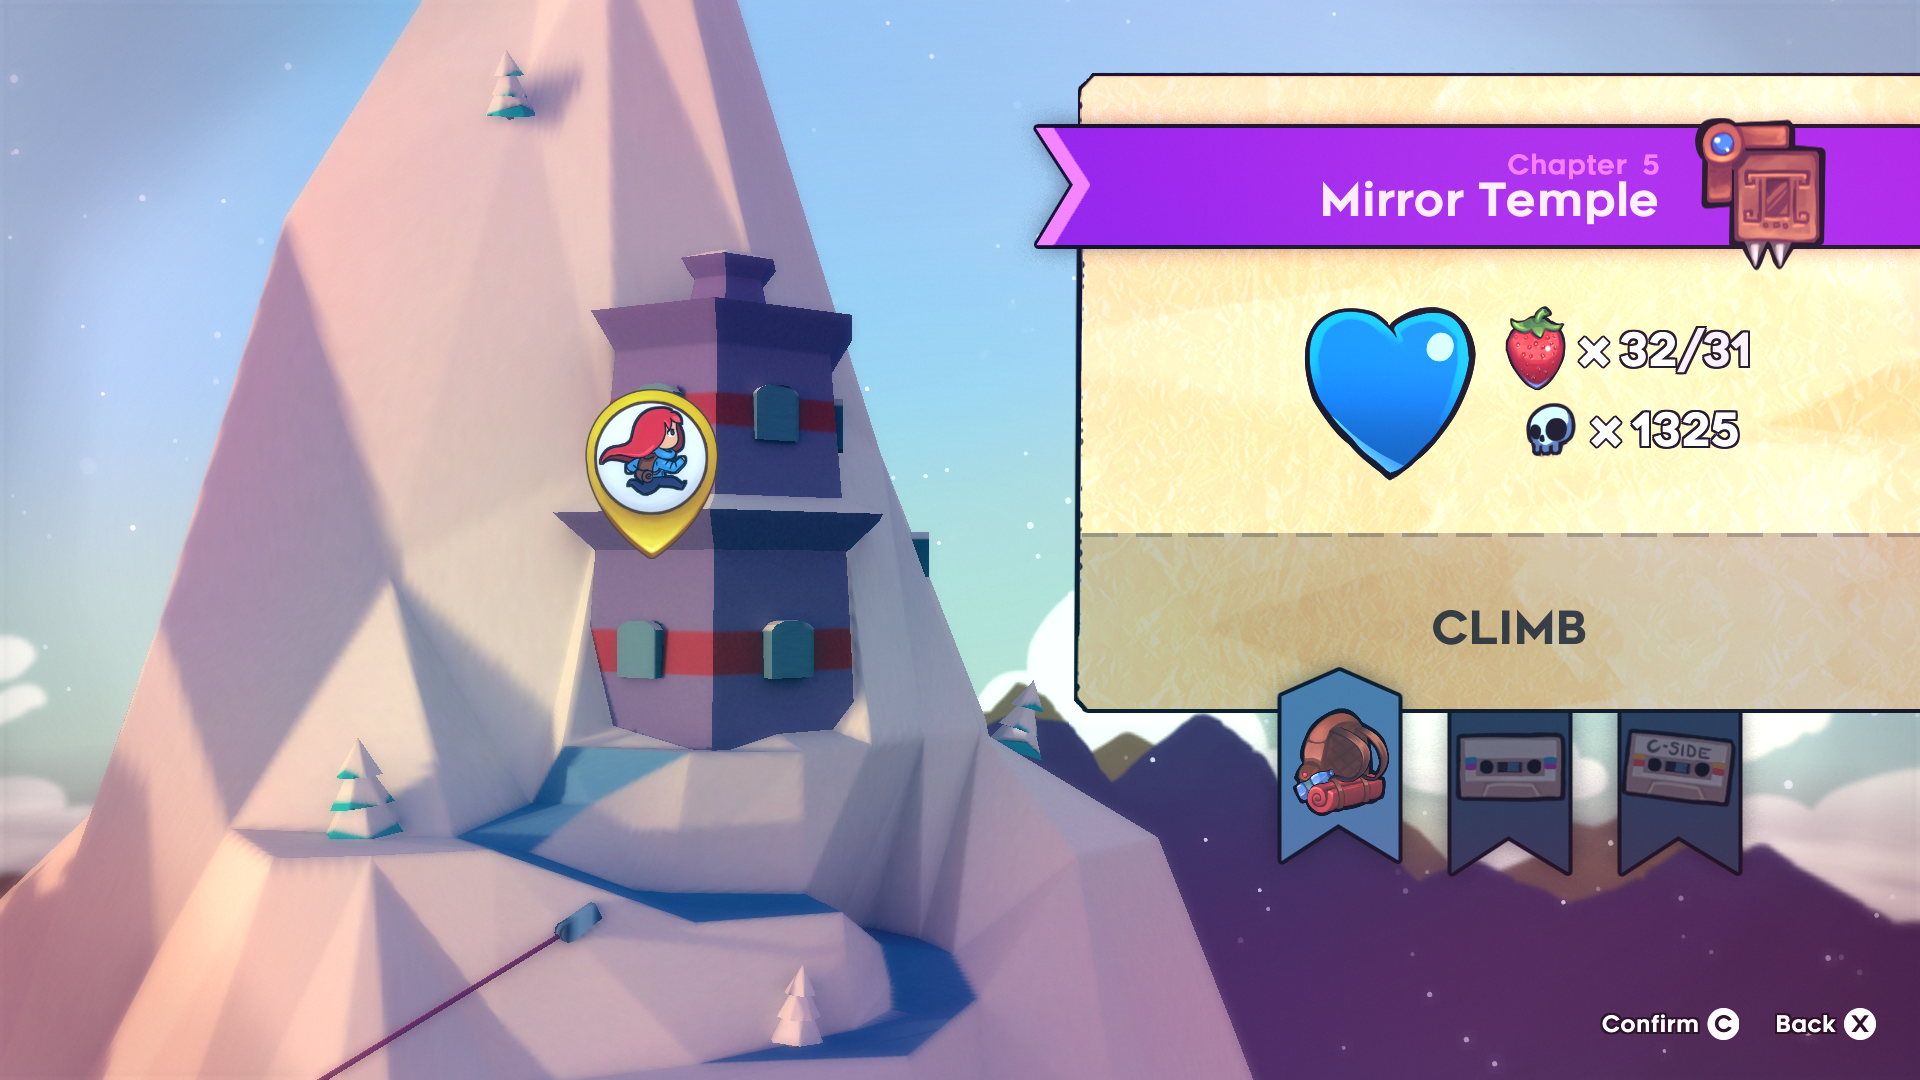 Chapter 5: Mirror Temple.  Again, the summit is not visible. 32/31 strawberries, 1325 deaths.